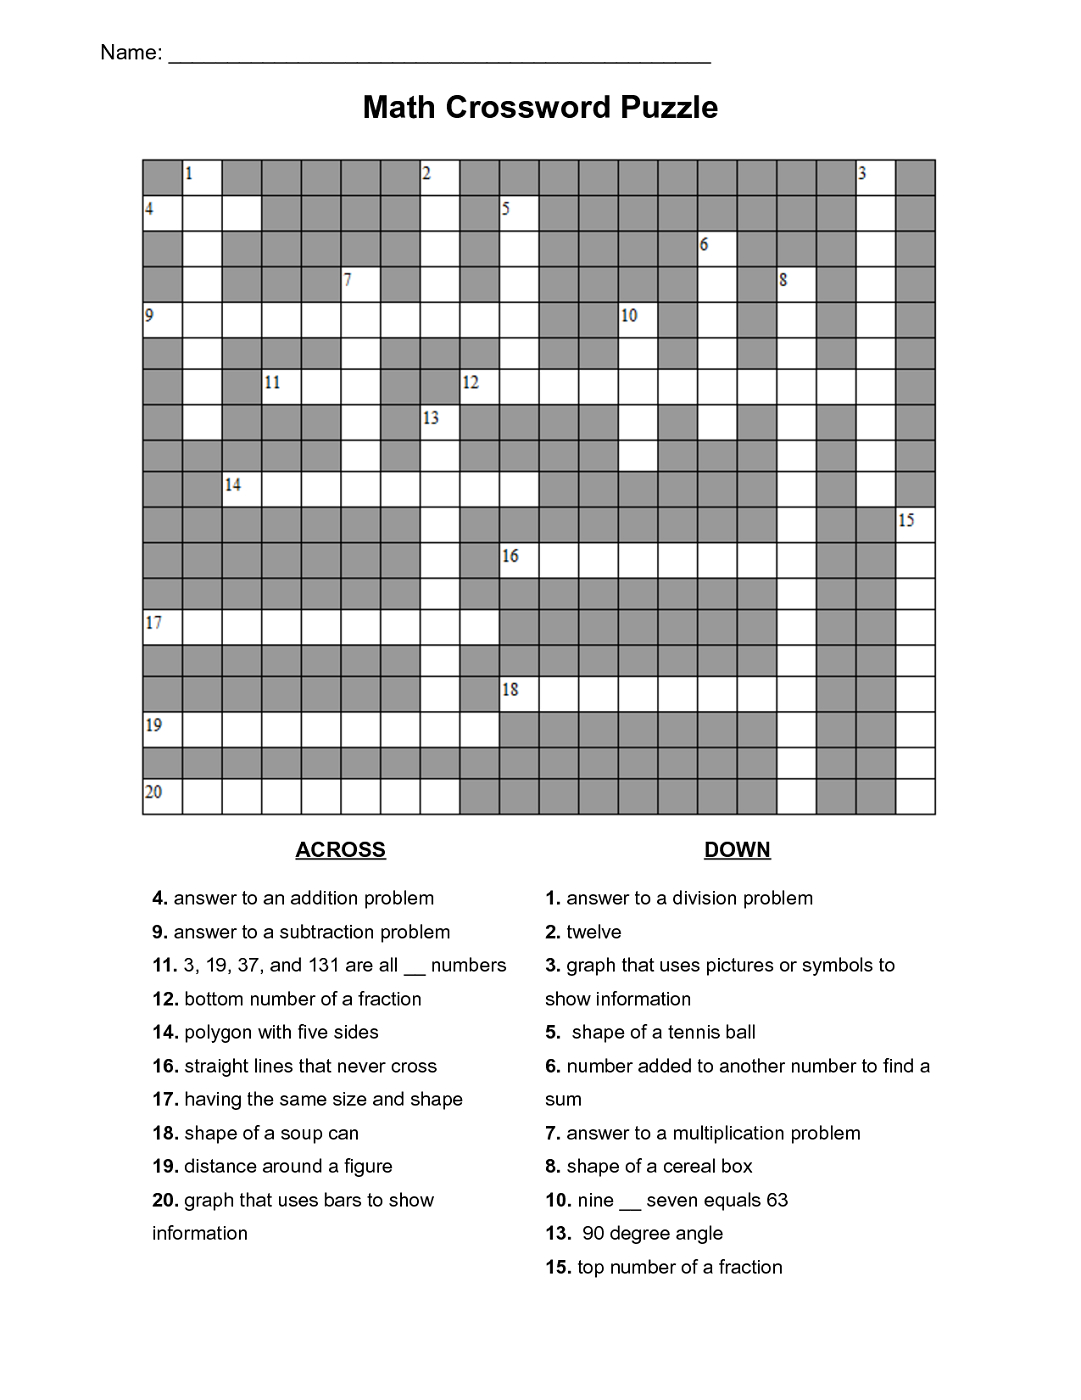 Math Puzzles For Kids | Educative Puzzle For Kids | Maths Puzzles - Math Crossword Puzzles Printable